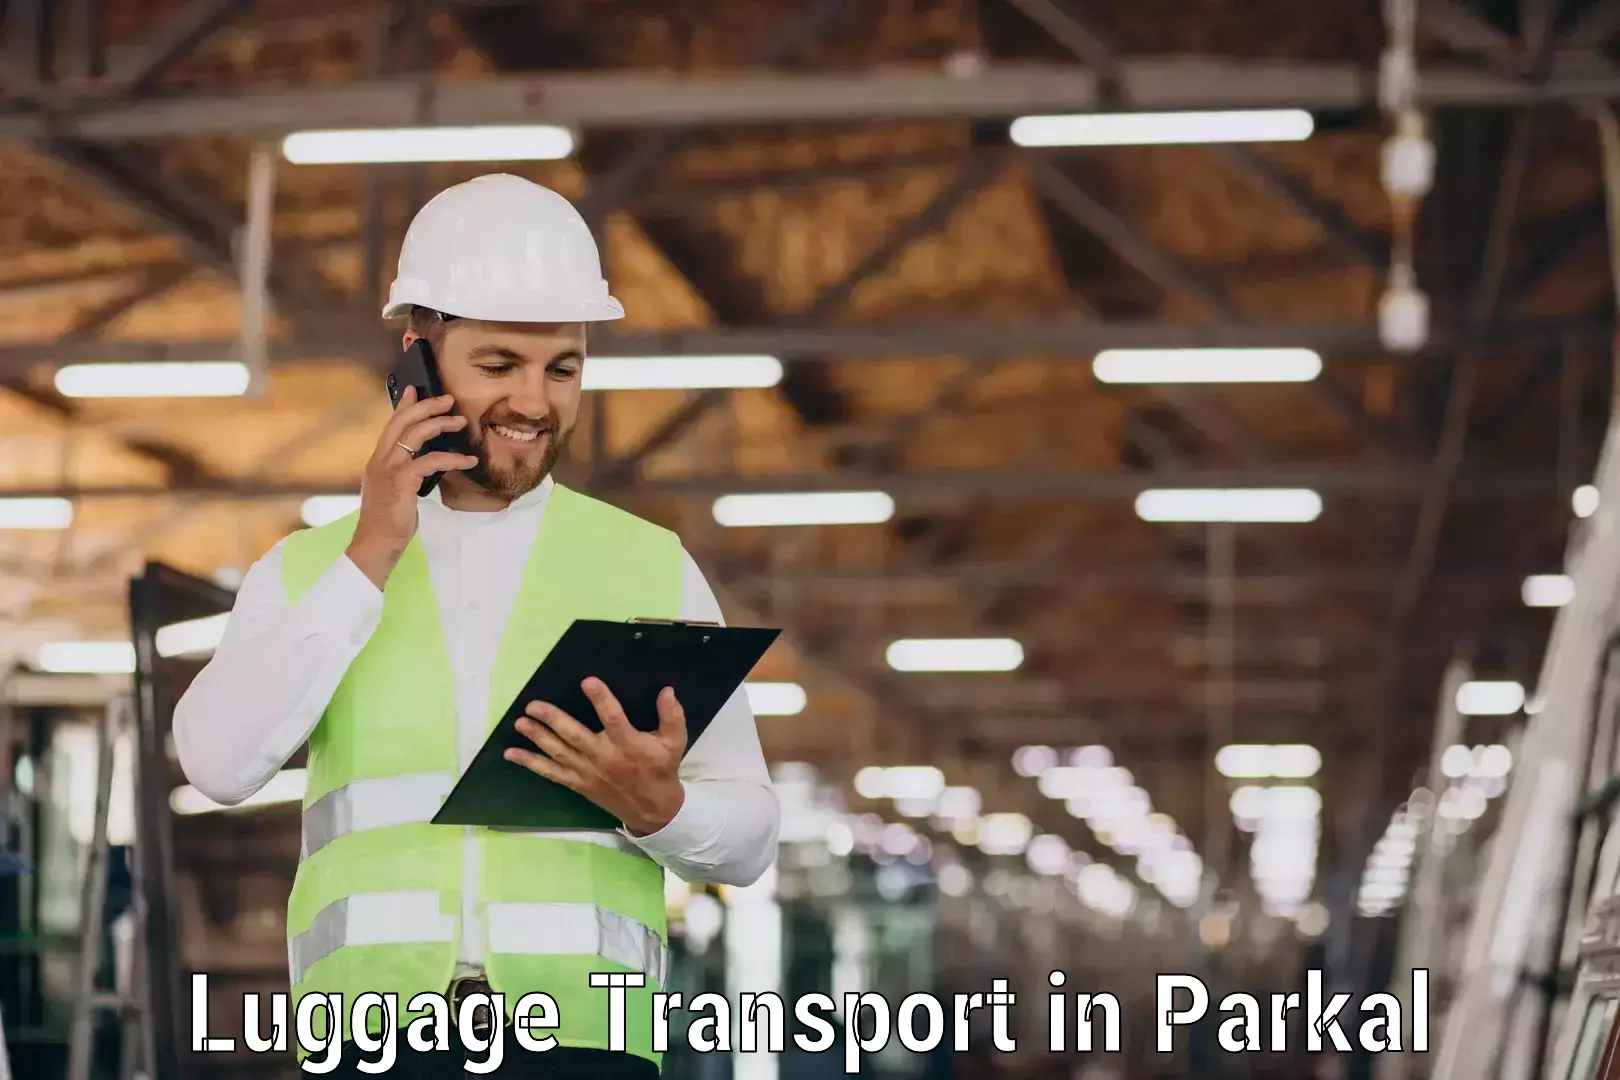 Smart baggage shipping in Parkal